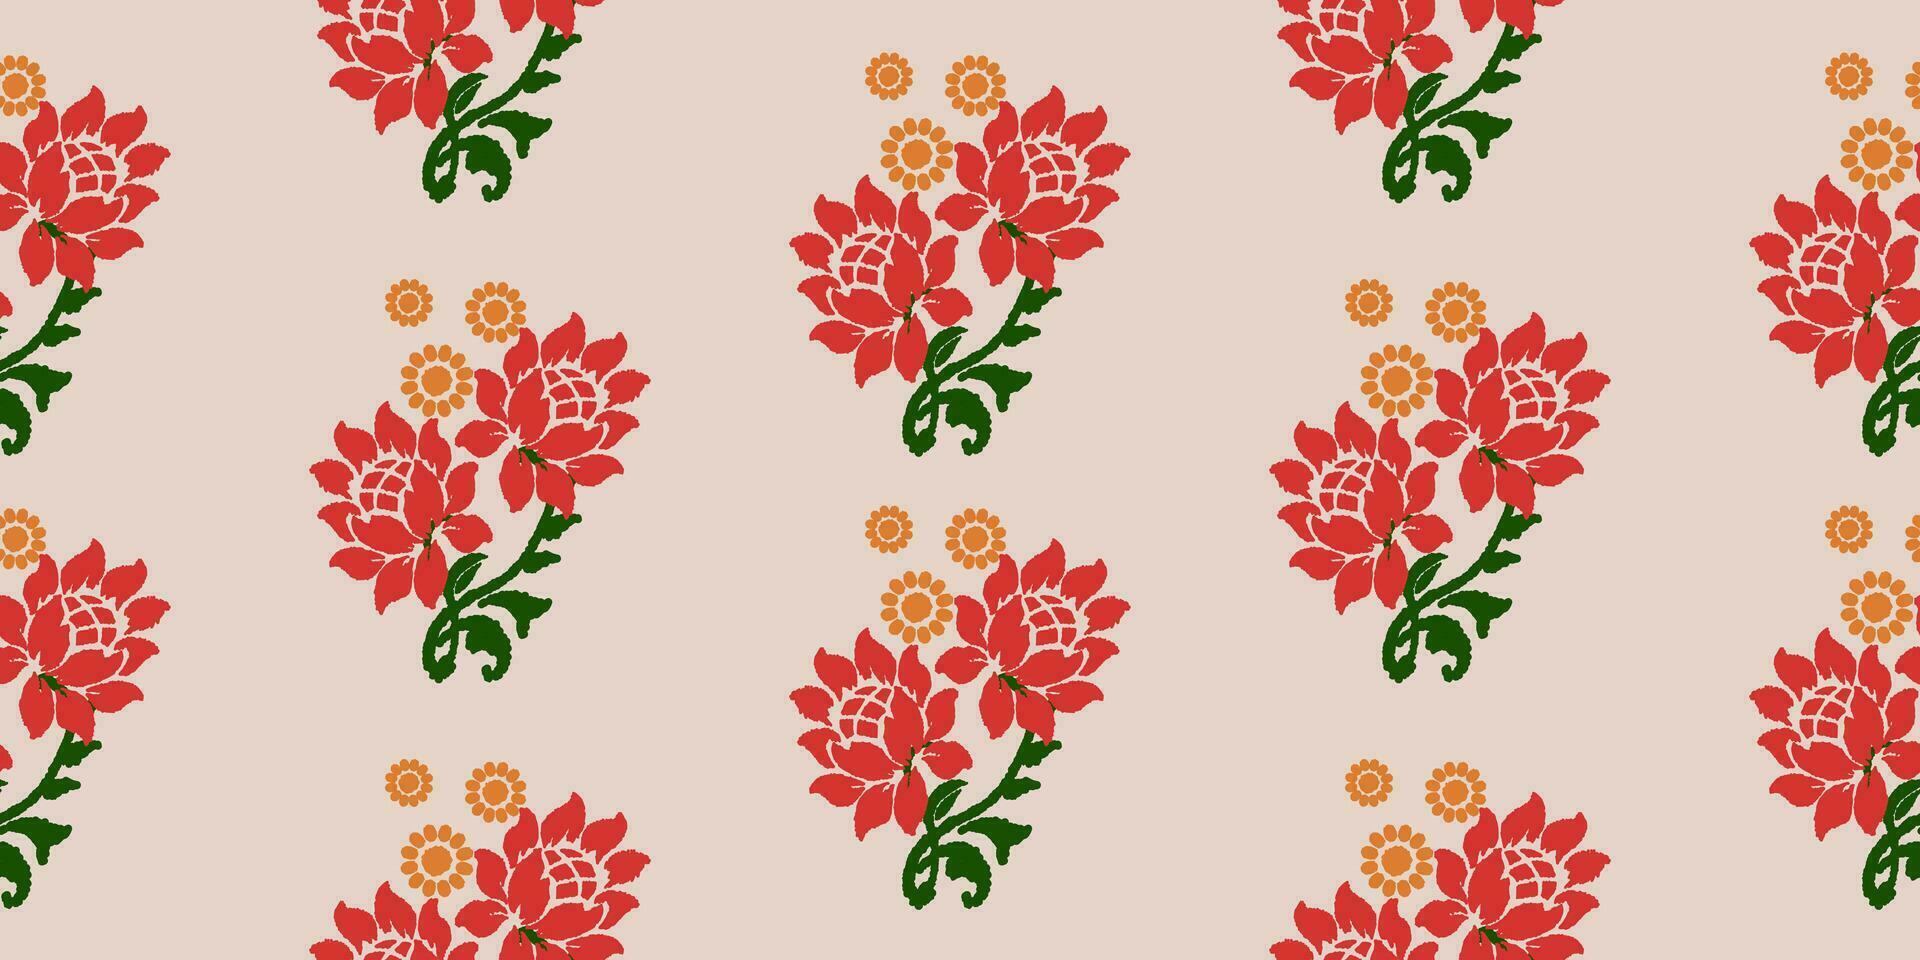 Ikat floral embroidery pattern on light pink background, traditional geometric pattern, Aztec style abstract vector illustration For background, carpet, wallpaper, clothes, batik wrapping, cloth.